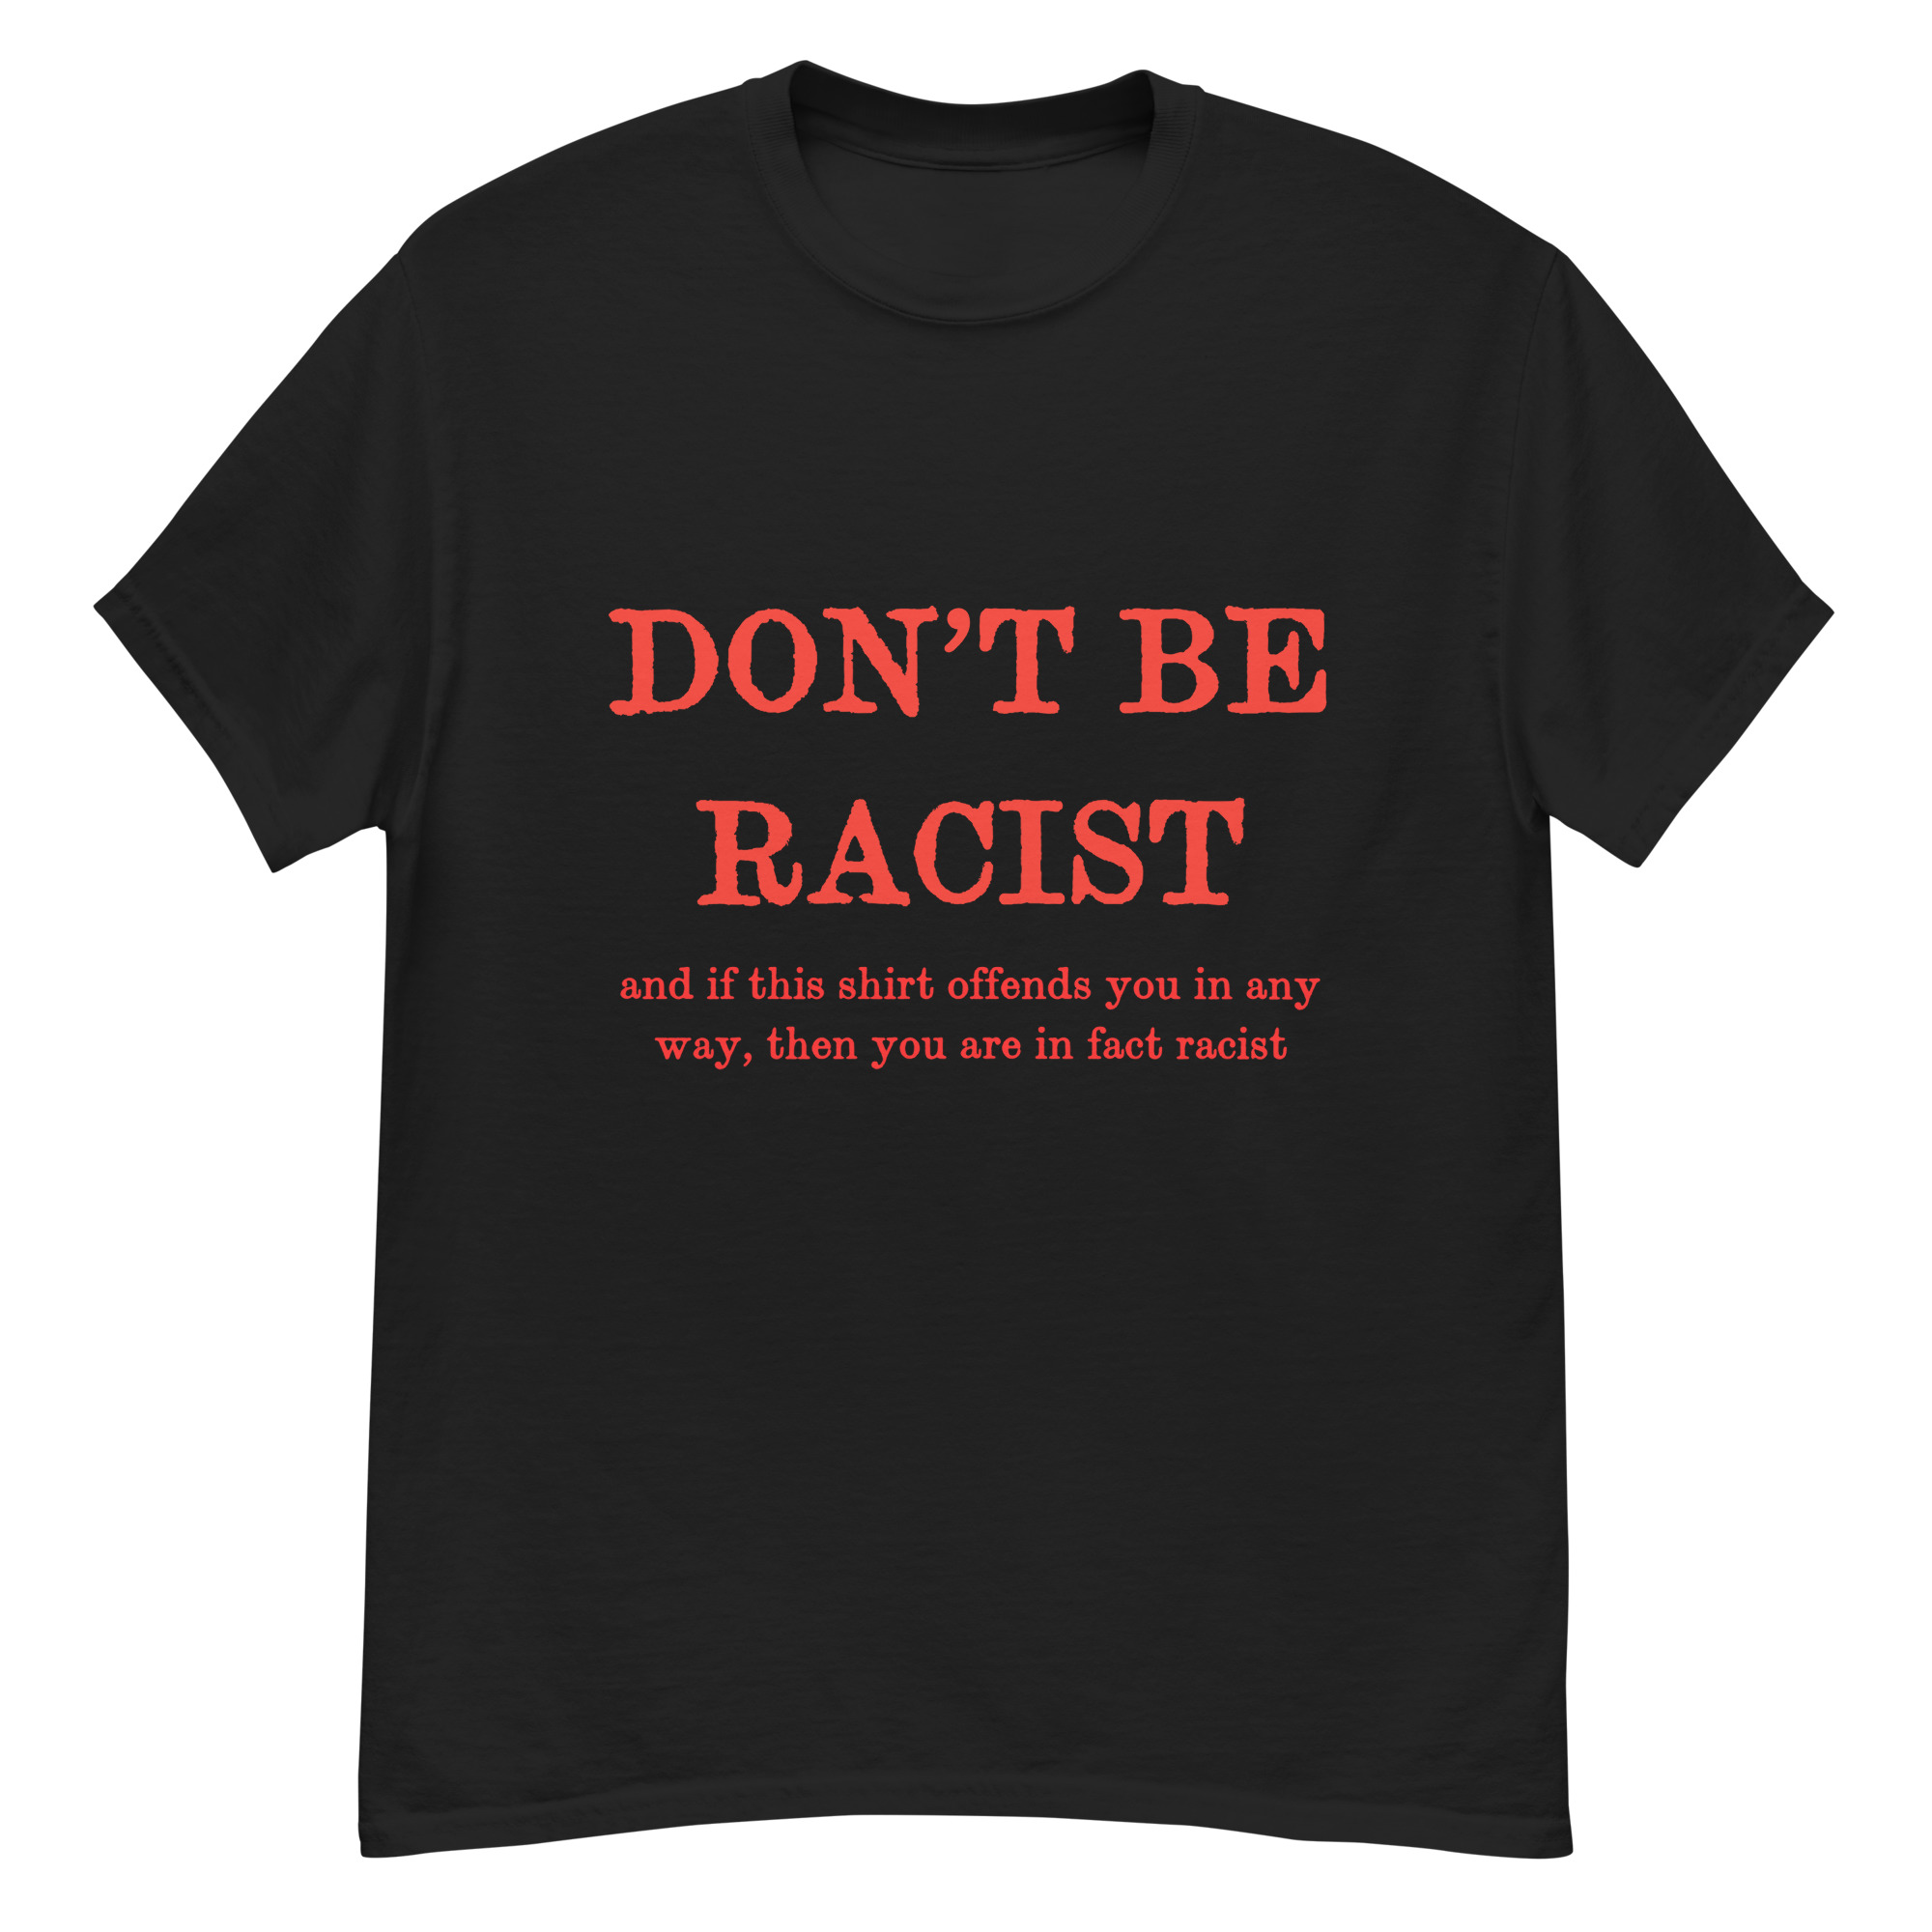 Featured image for “Don’t Be Racist - Men's classic Gildan tee”